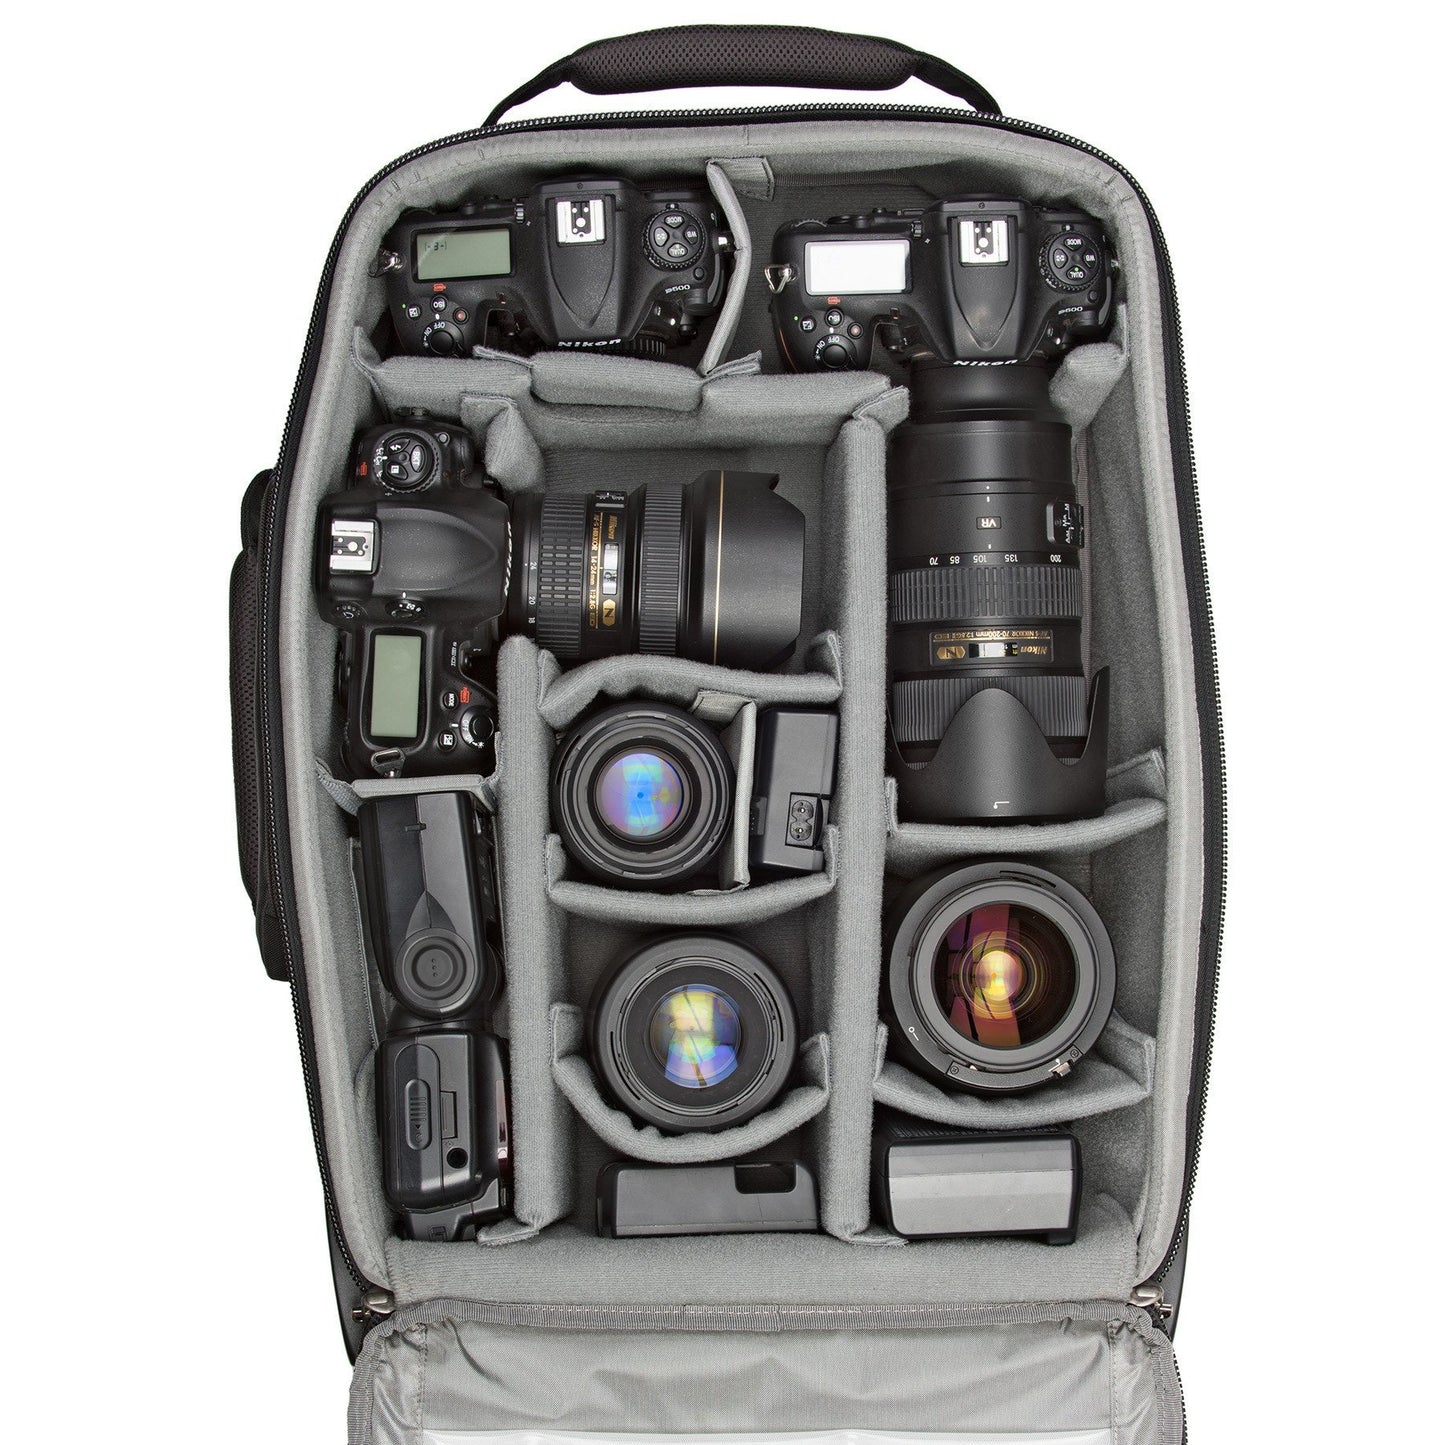 Airport Series Rolling Camera Bags for Airlines – Think Tank Photo